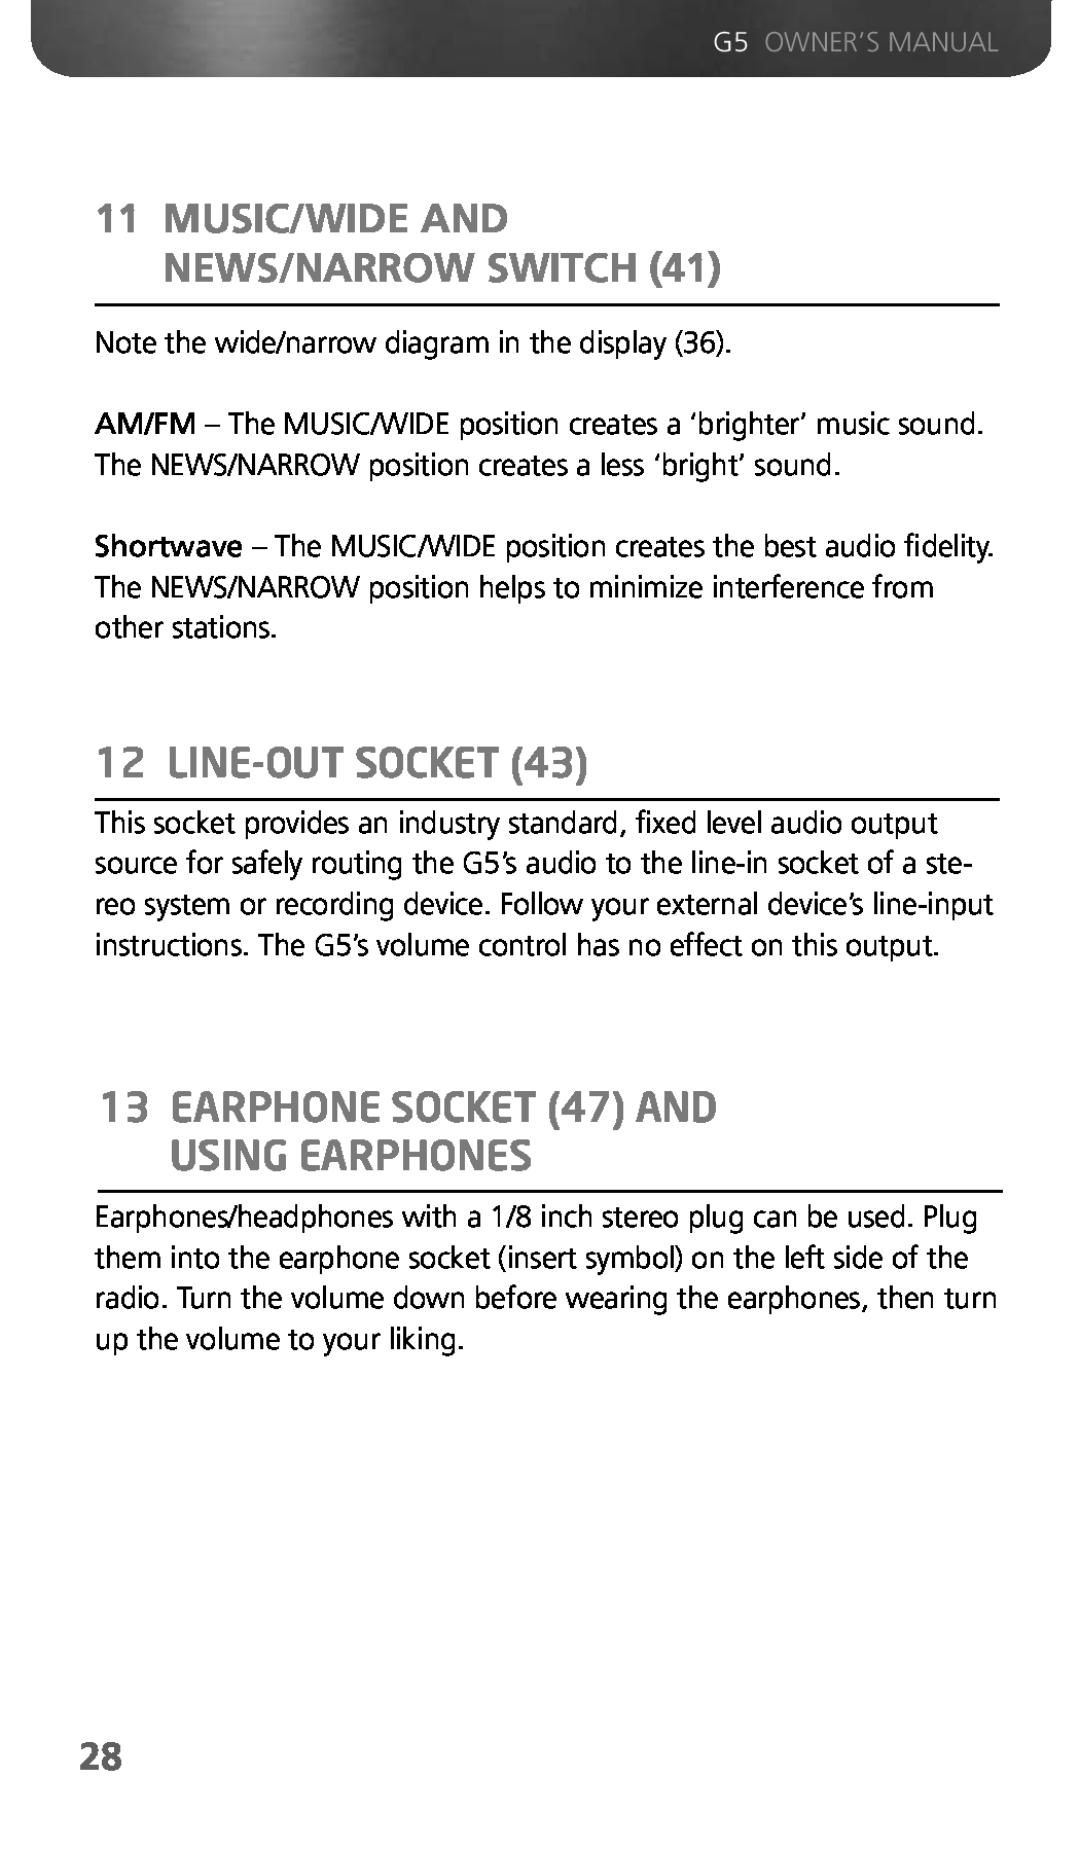 Eton G5 owner manual Line-Out Socket, EARPHONE SOCKET 47 AND USING EARPHONES, Music/Wide And News/Narrow Switch 